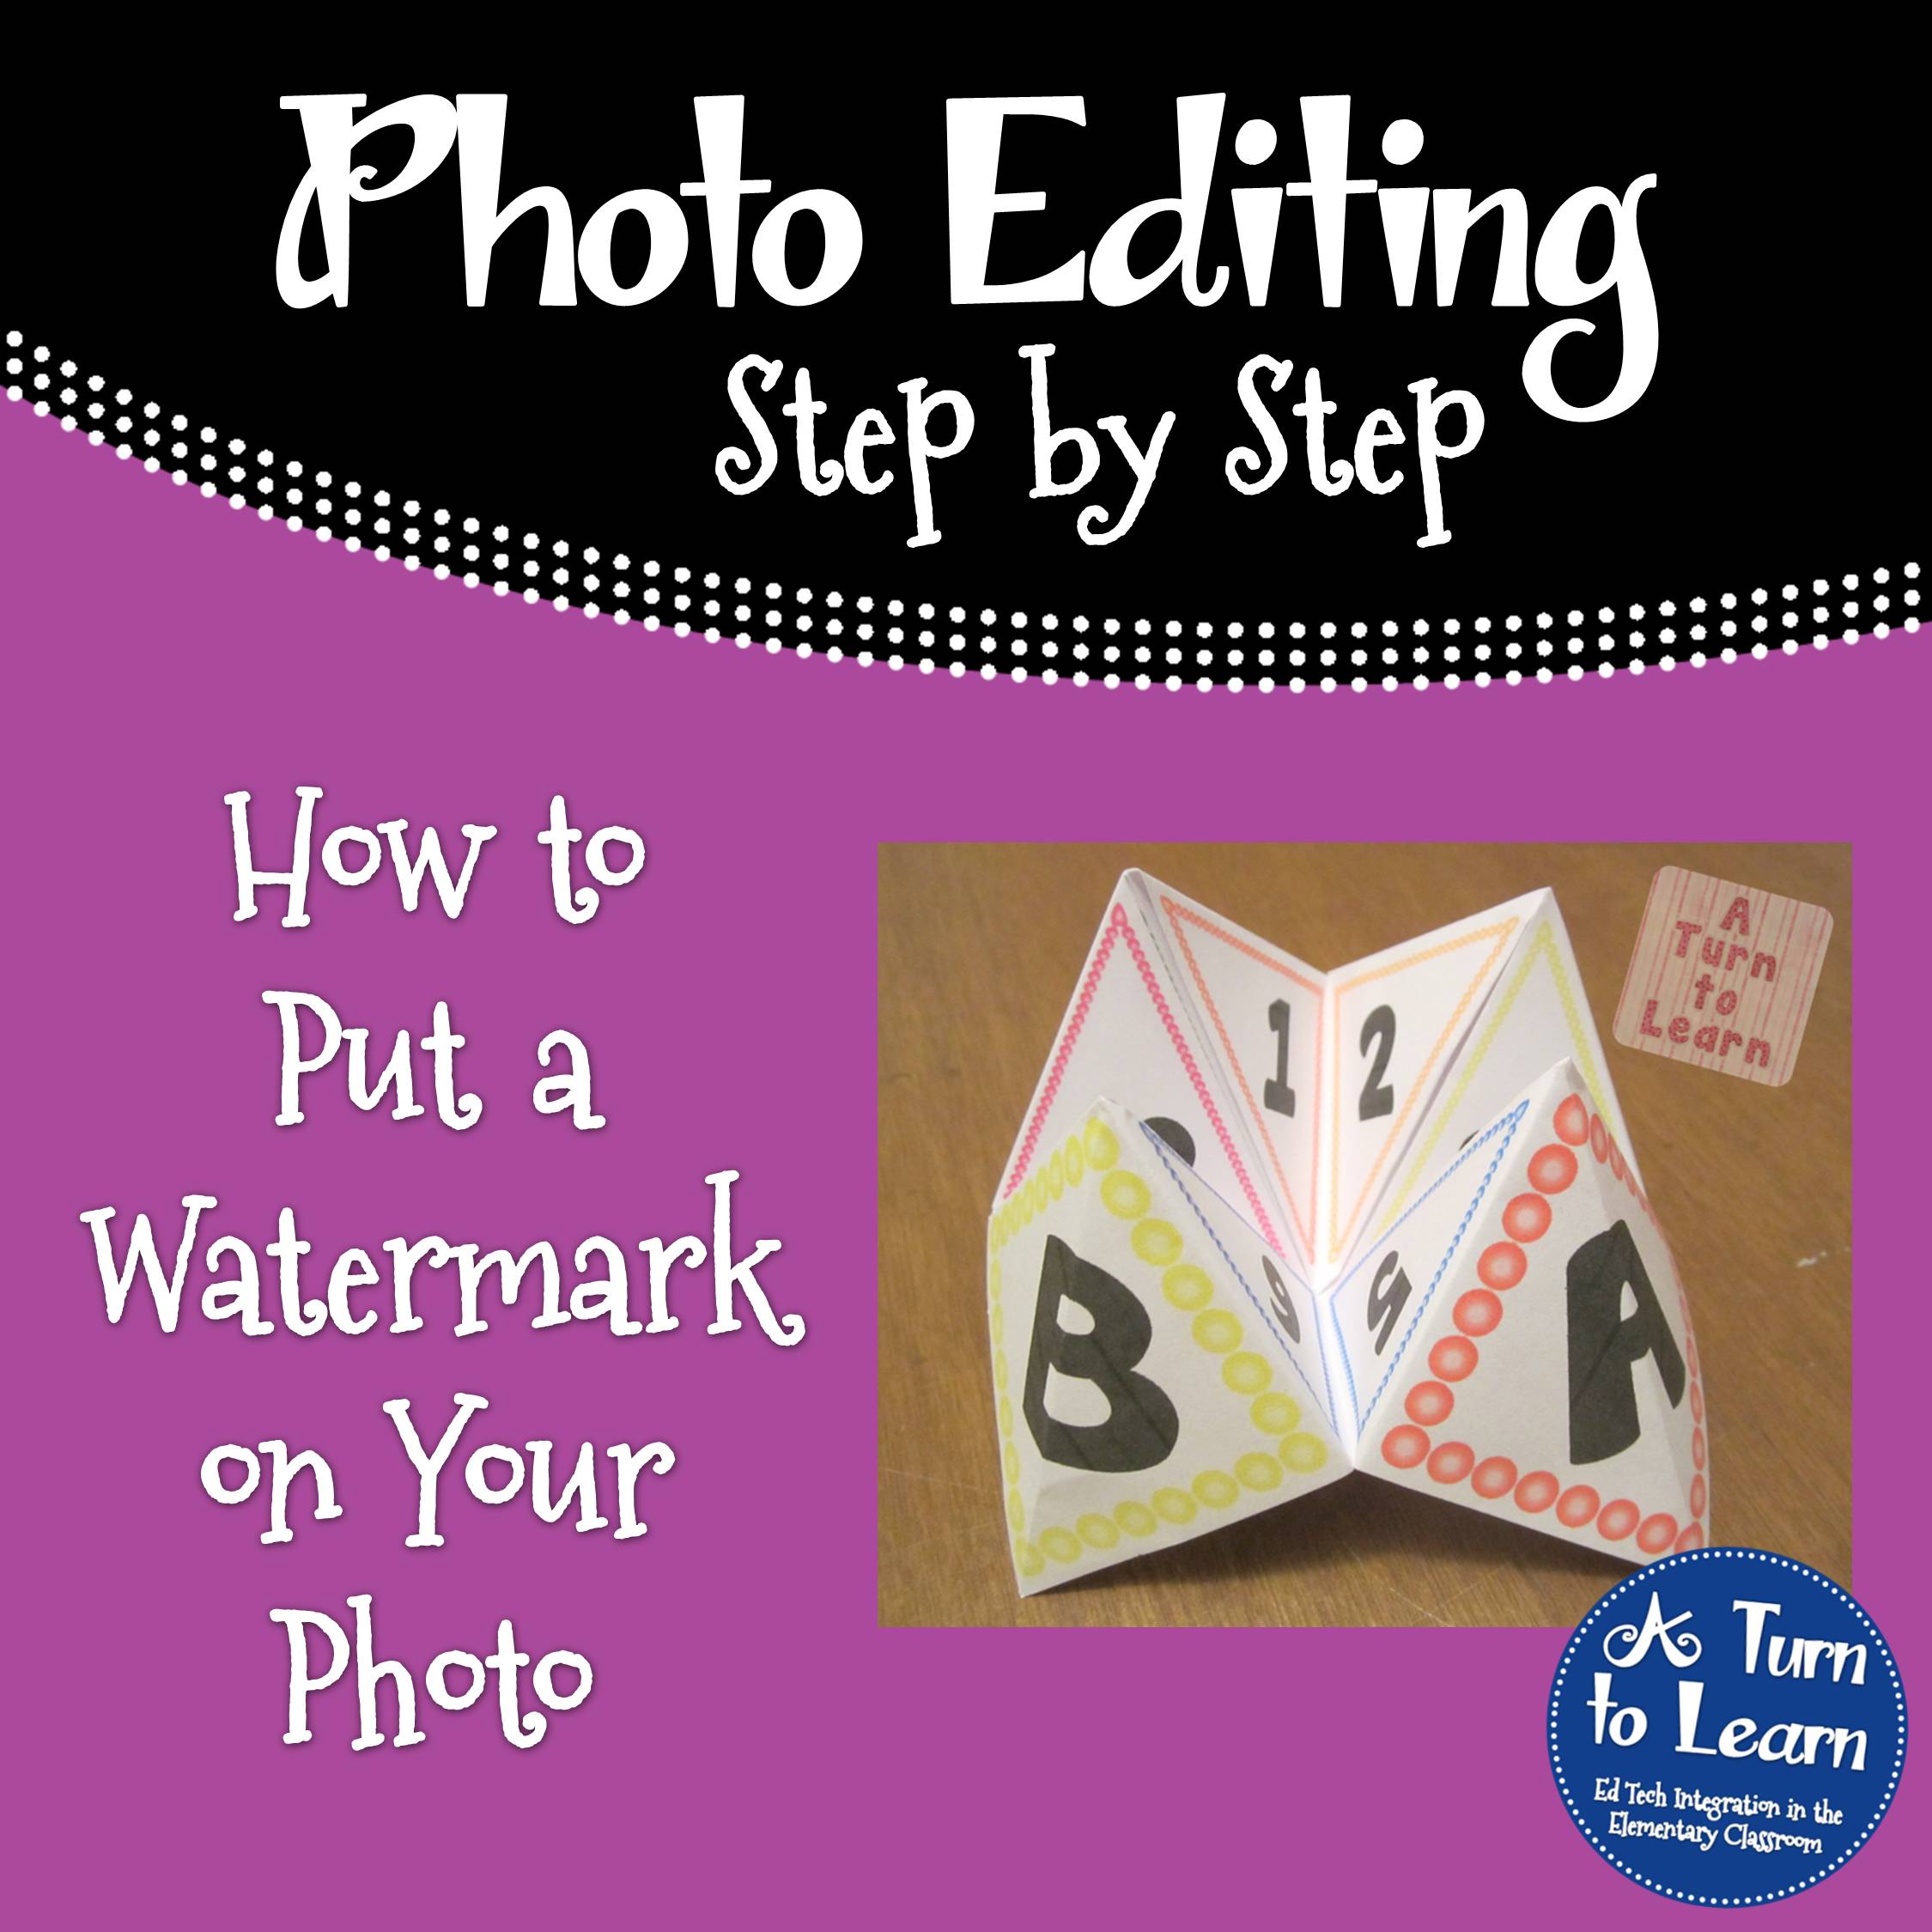 How to Put a Watermark on Your Photo